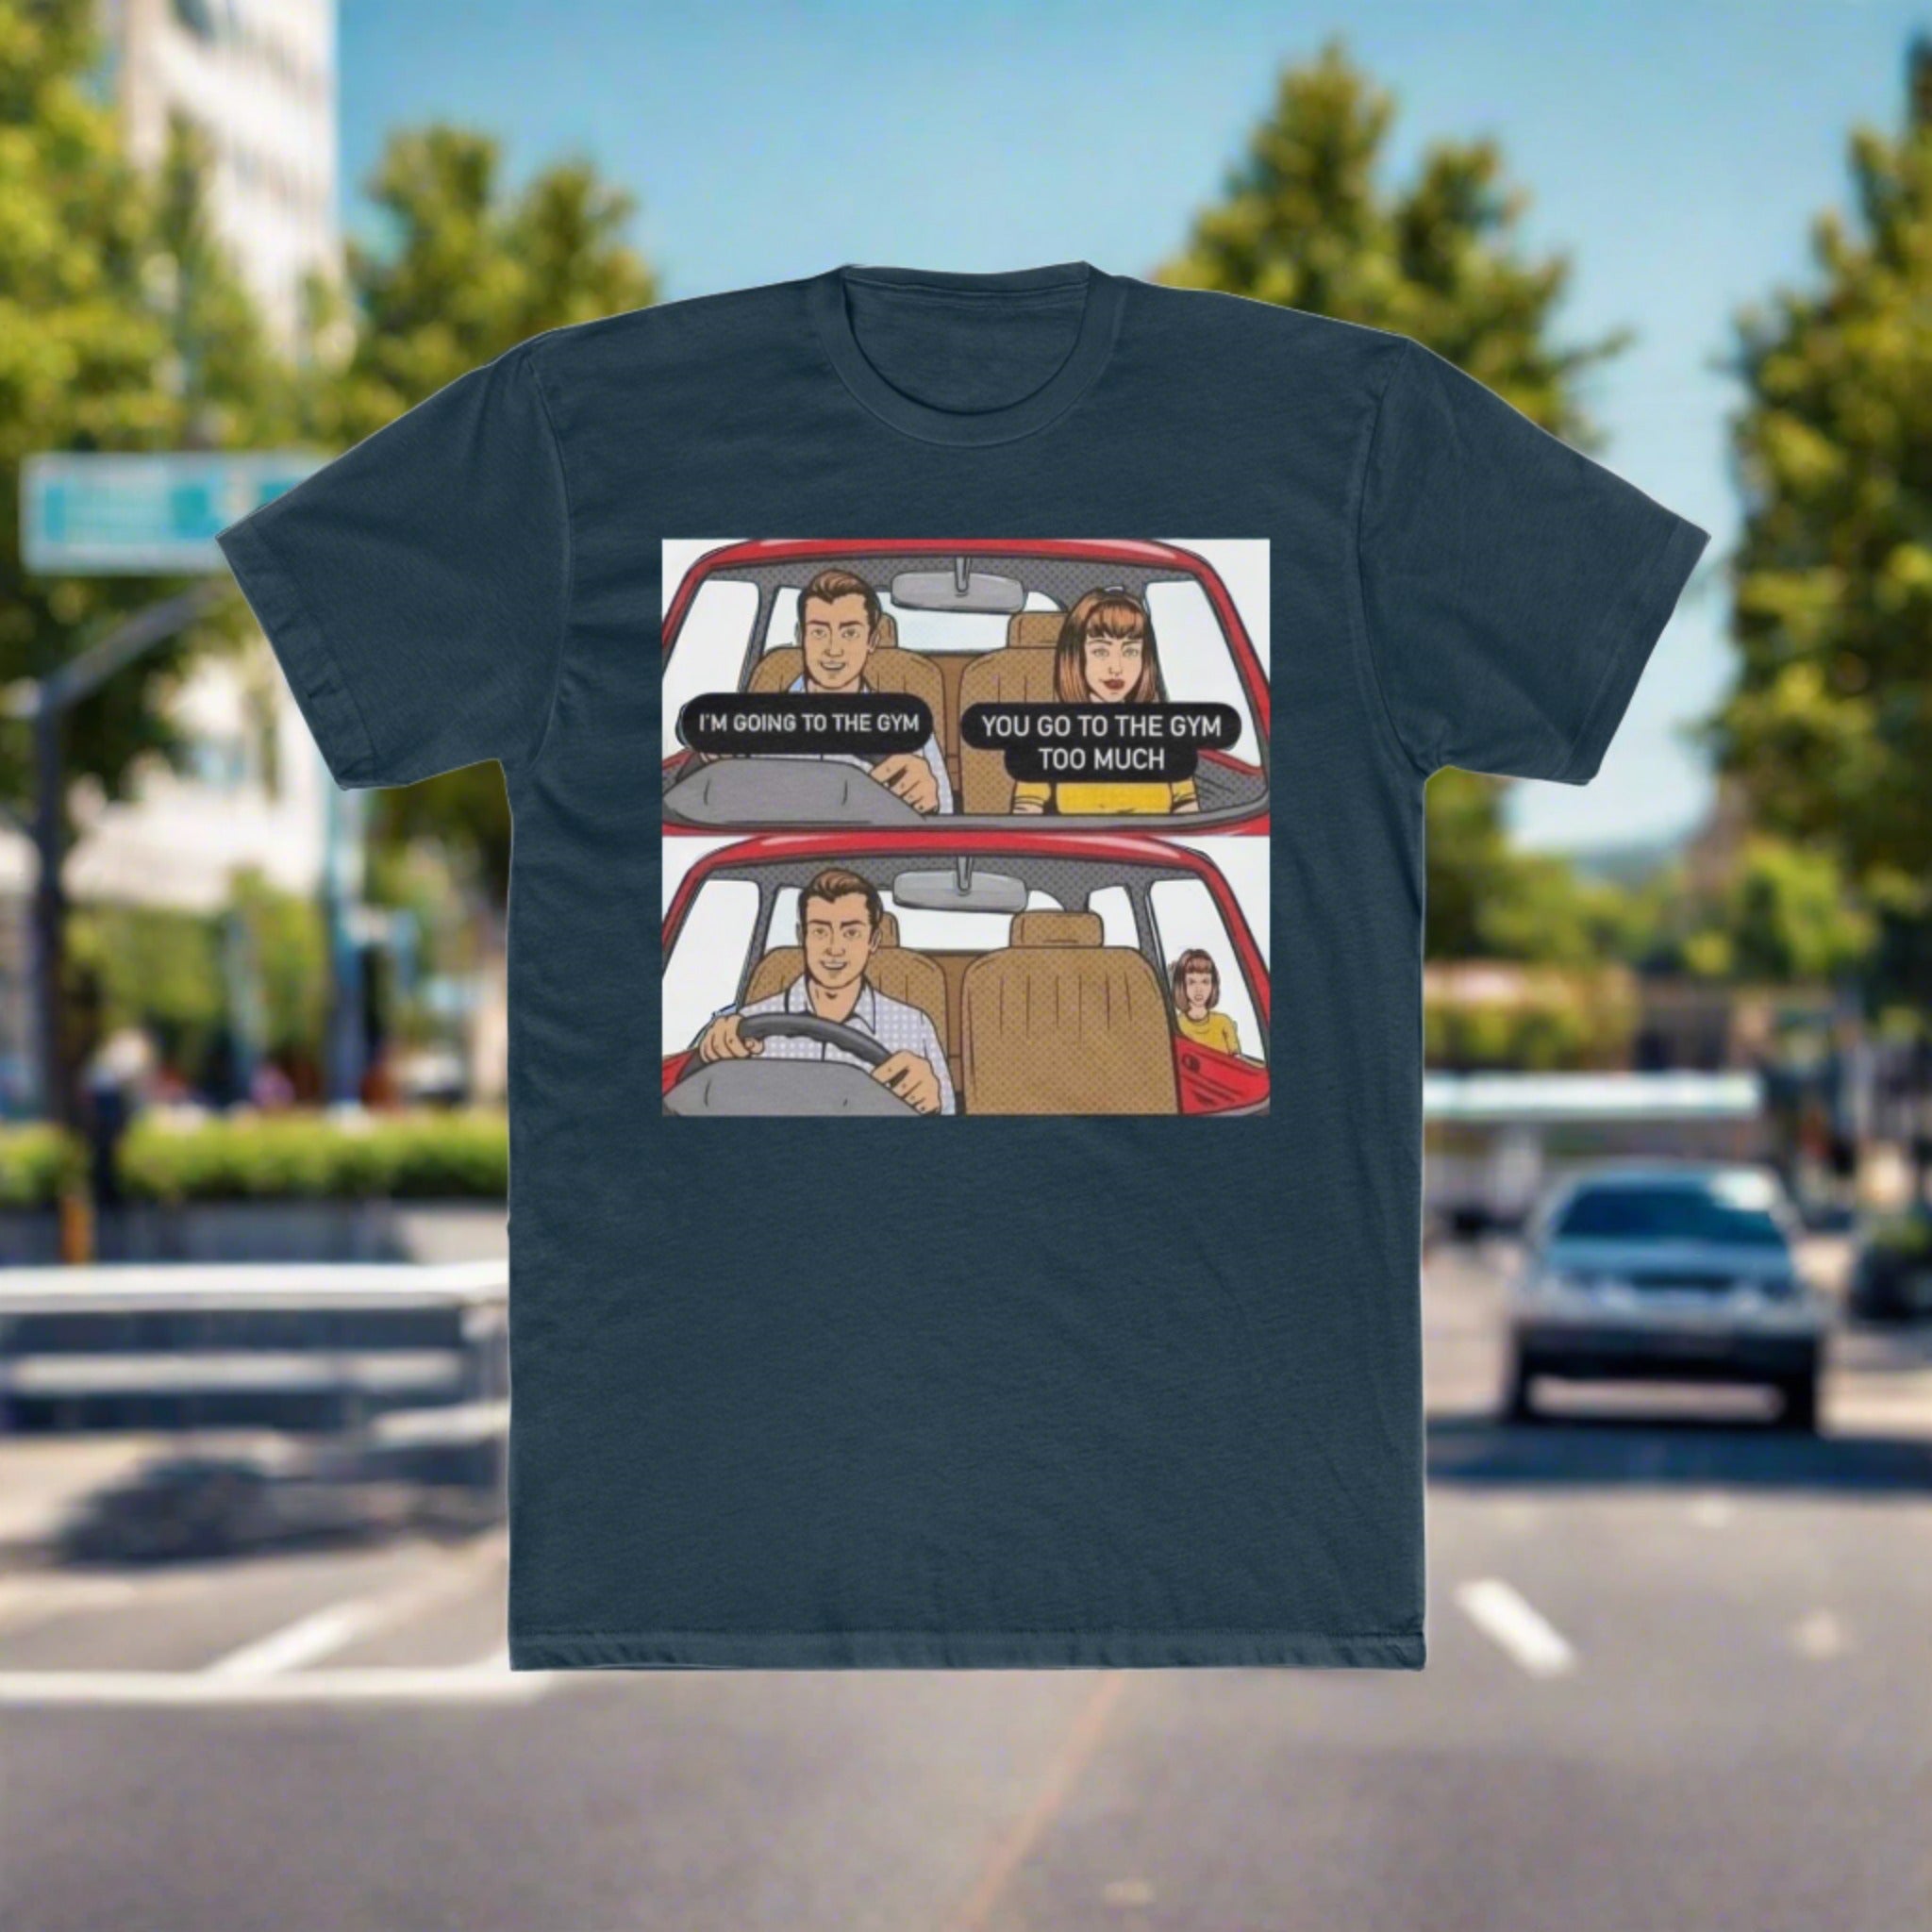 The image shows a stylish men's cotton crew tee adorned with a vibrant, comic-style illustration of a man humorously ejecting his girlfriend from the car on his way to the gym. The caption "Gym Over Romance" boldly underscores the image, making it clear where his priorities lie. The shirt's relaxed fit and soft material are evident, promising both comfort and style.